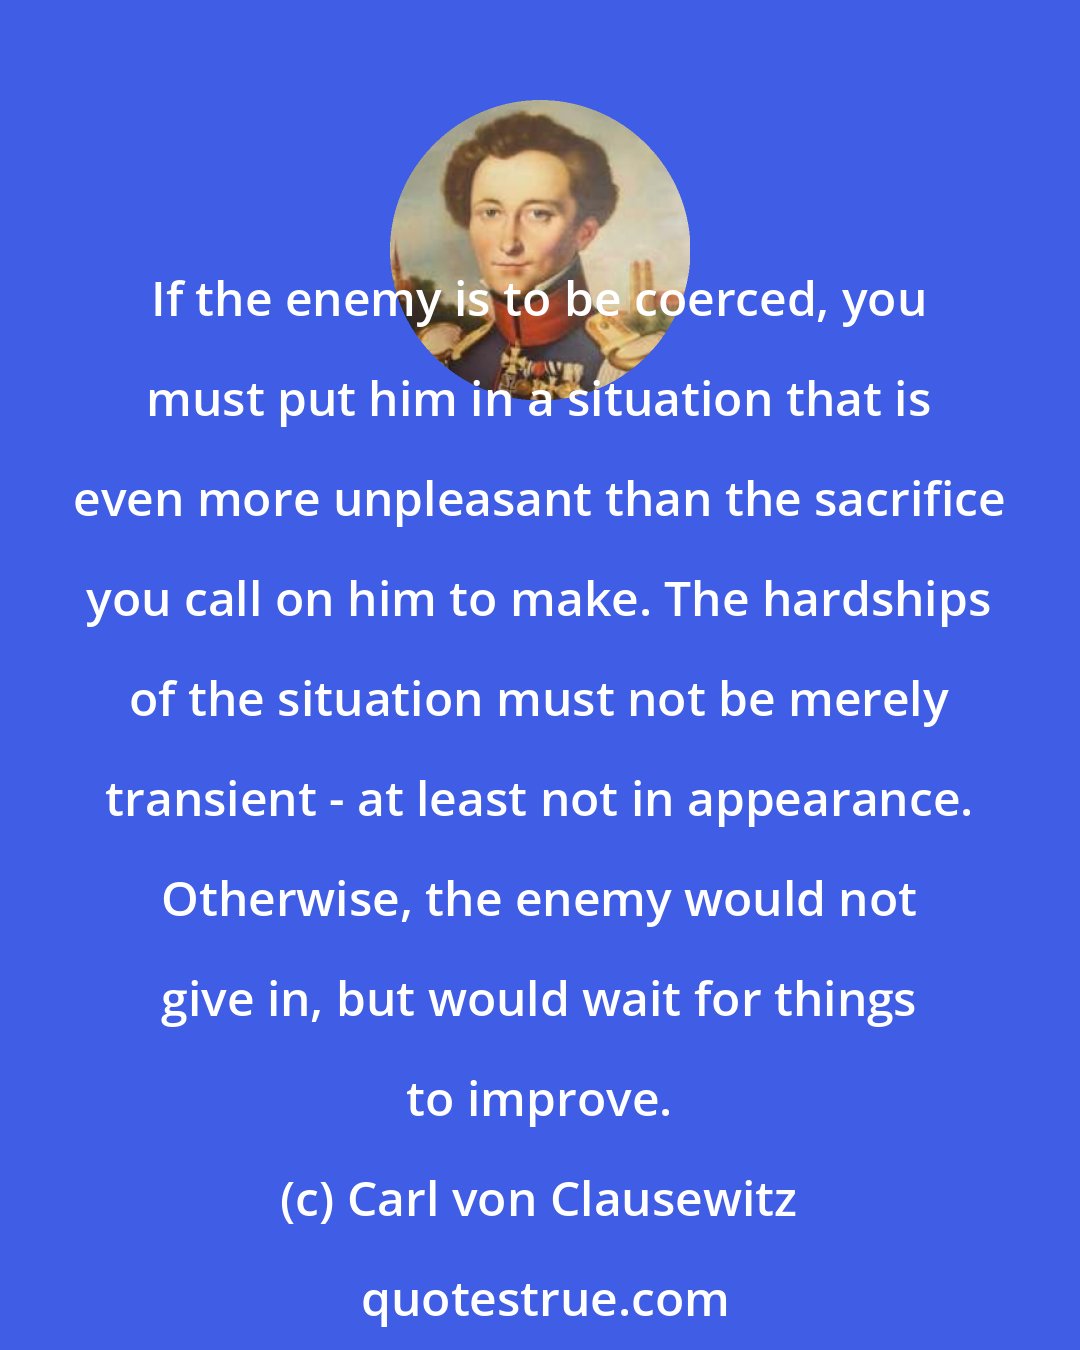 Carl von Clausewitz: If the enemy is to be coerced, you must put him in a situation that is even more unpleasant than the sacrifice you call on him to make. The hardships of the situation must not be merely transient - at least not in appearance. Otherwise, the enemy would not give in, but would wait for things to improve.